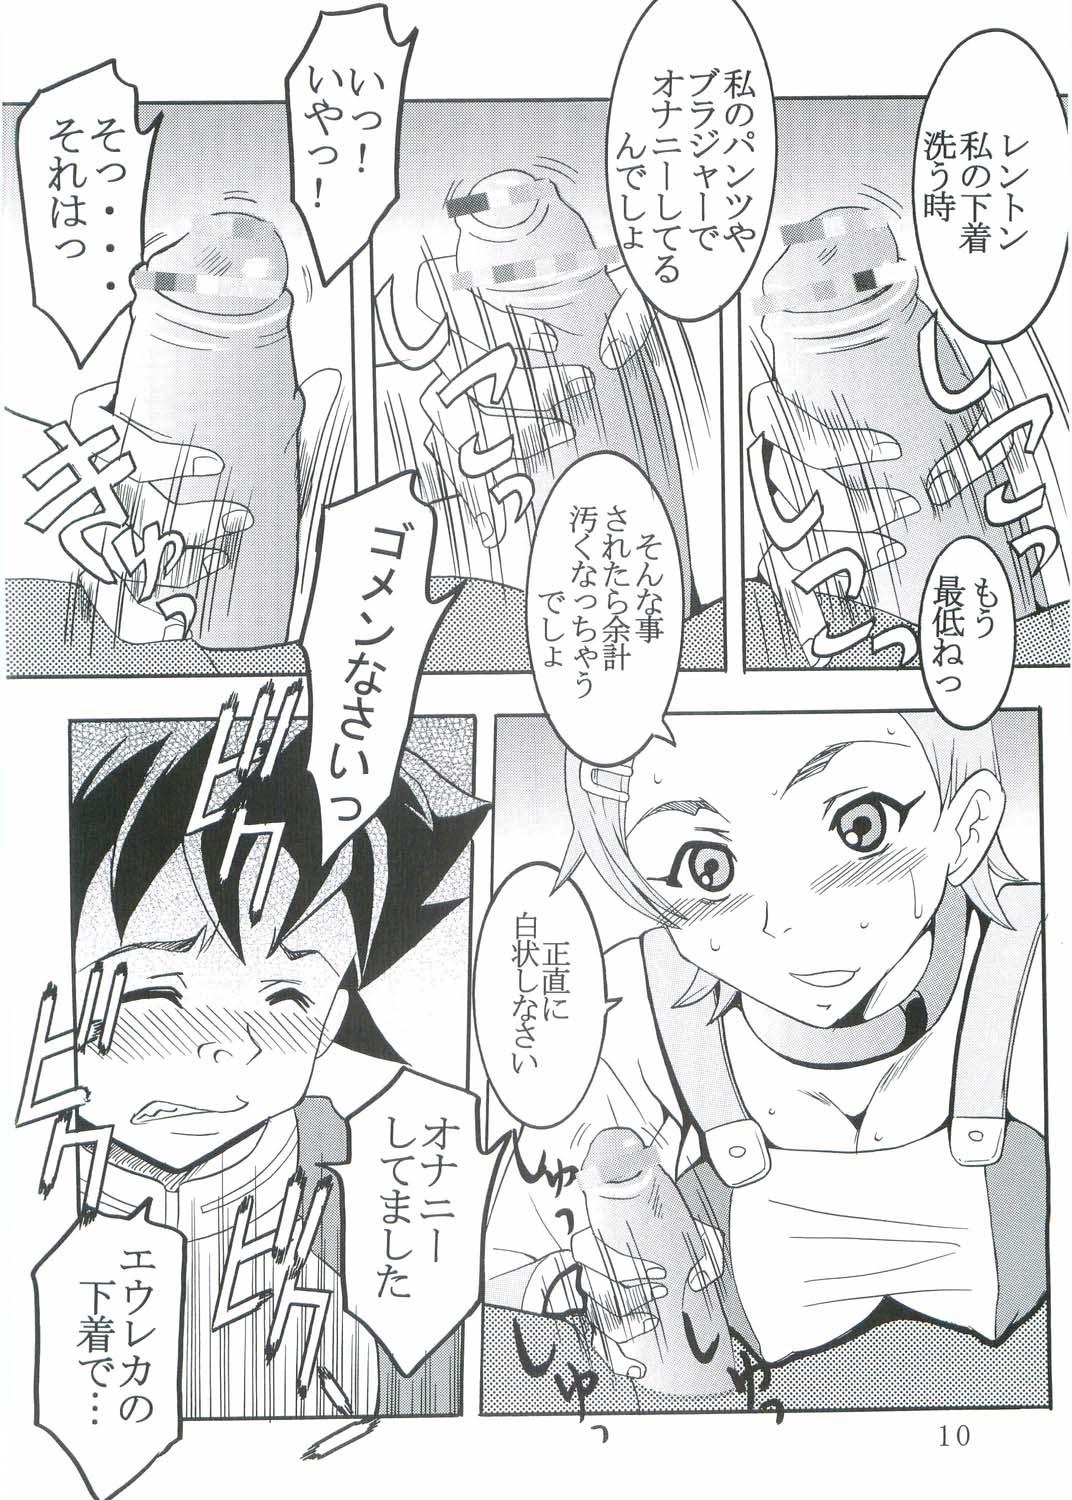 Sucking Ura ray-out - Eureka 7 Nudes - Page 11